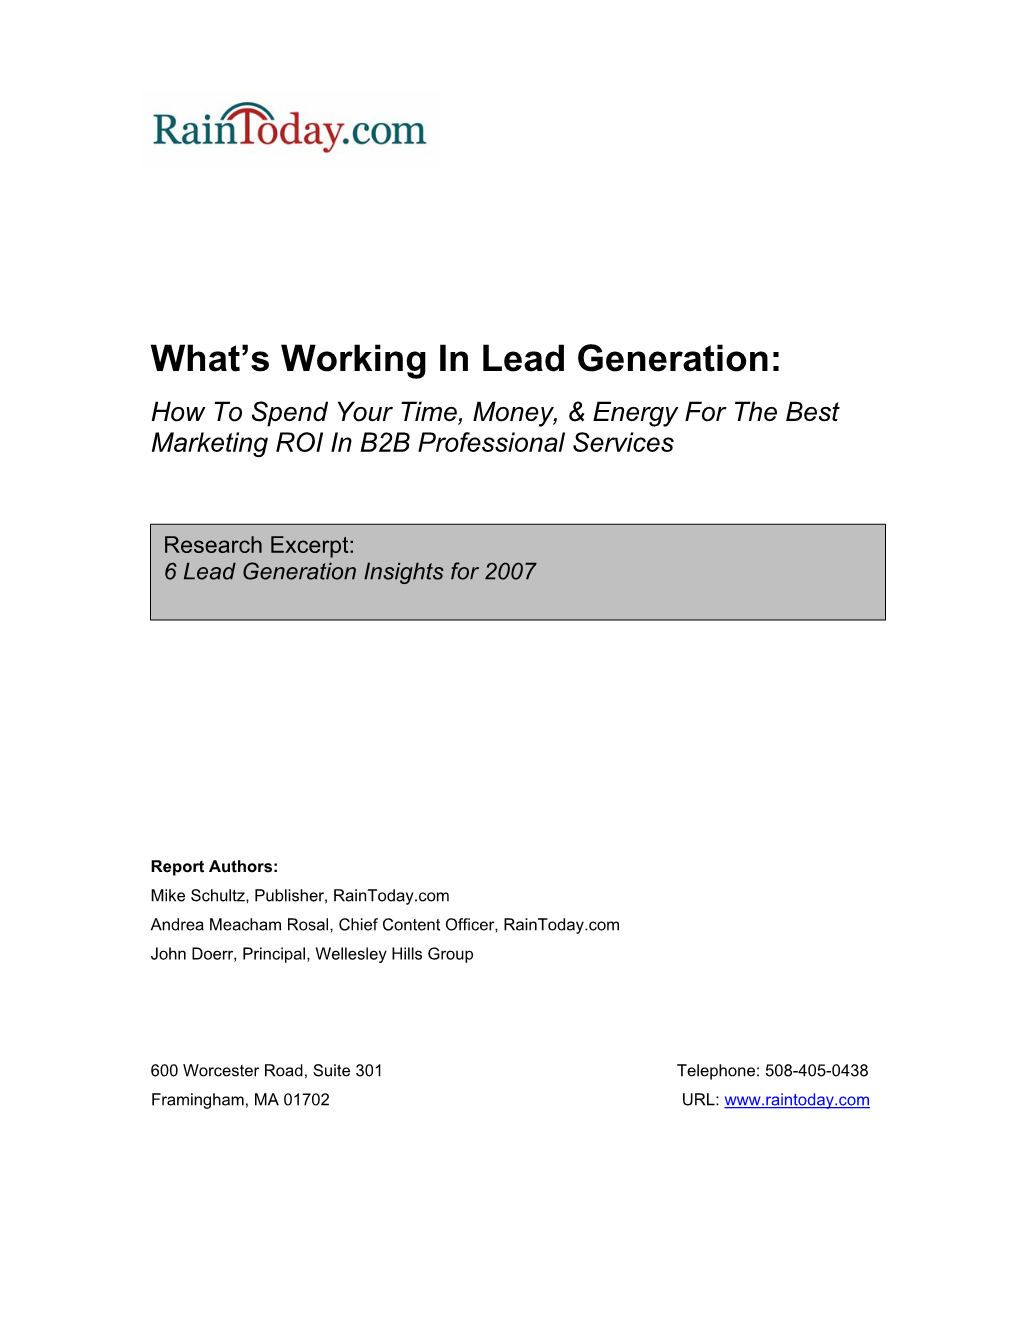 What's Working in Lead Generation (2007)